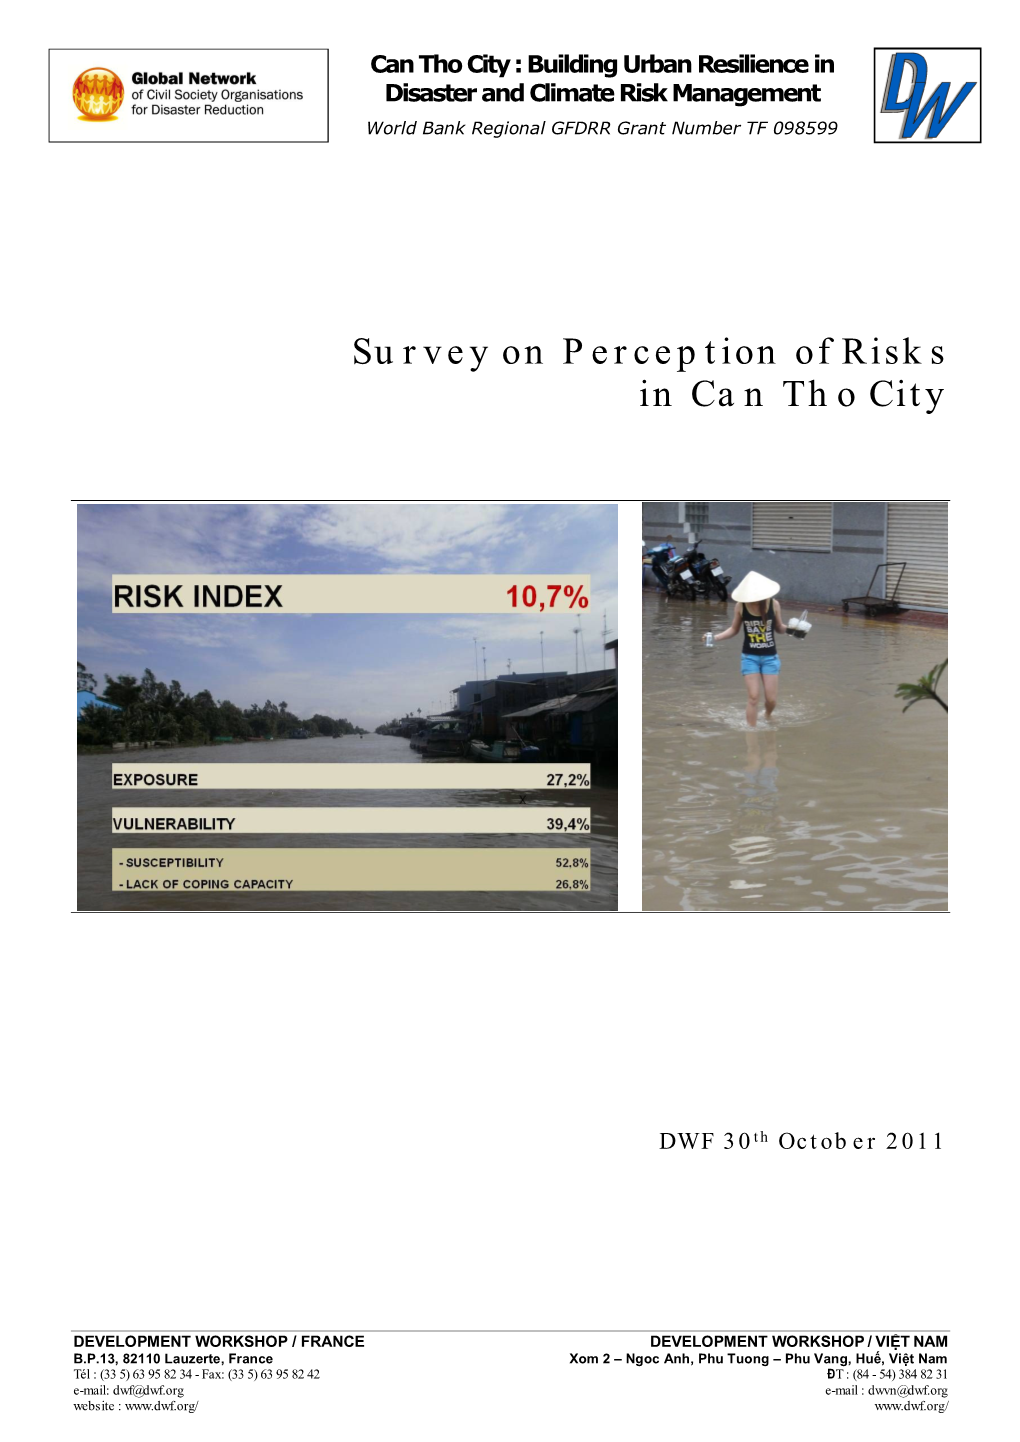 Survey on Perception of Risks in Can Tho City